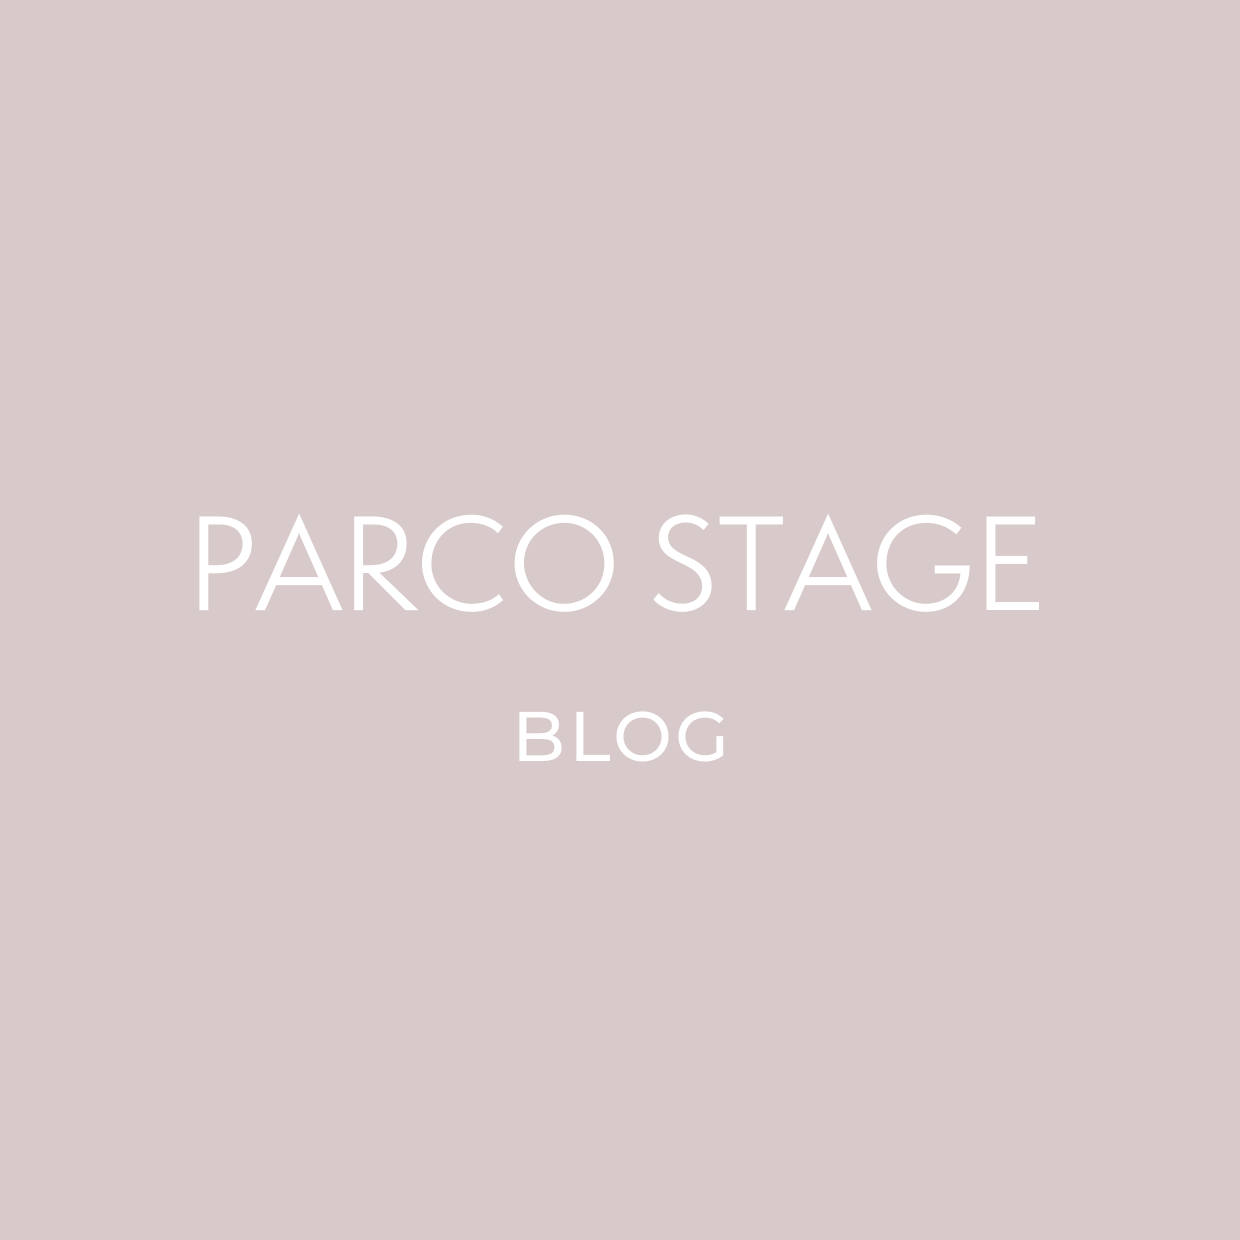 PARCO STAGEより年末年始のサービスについてのご案内